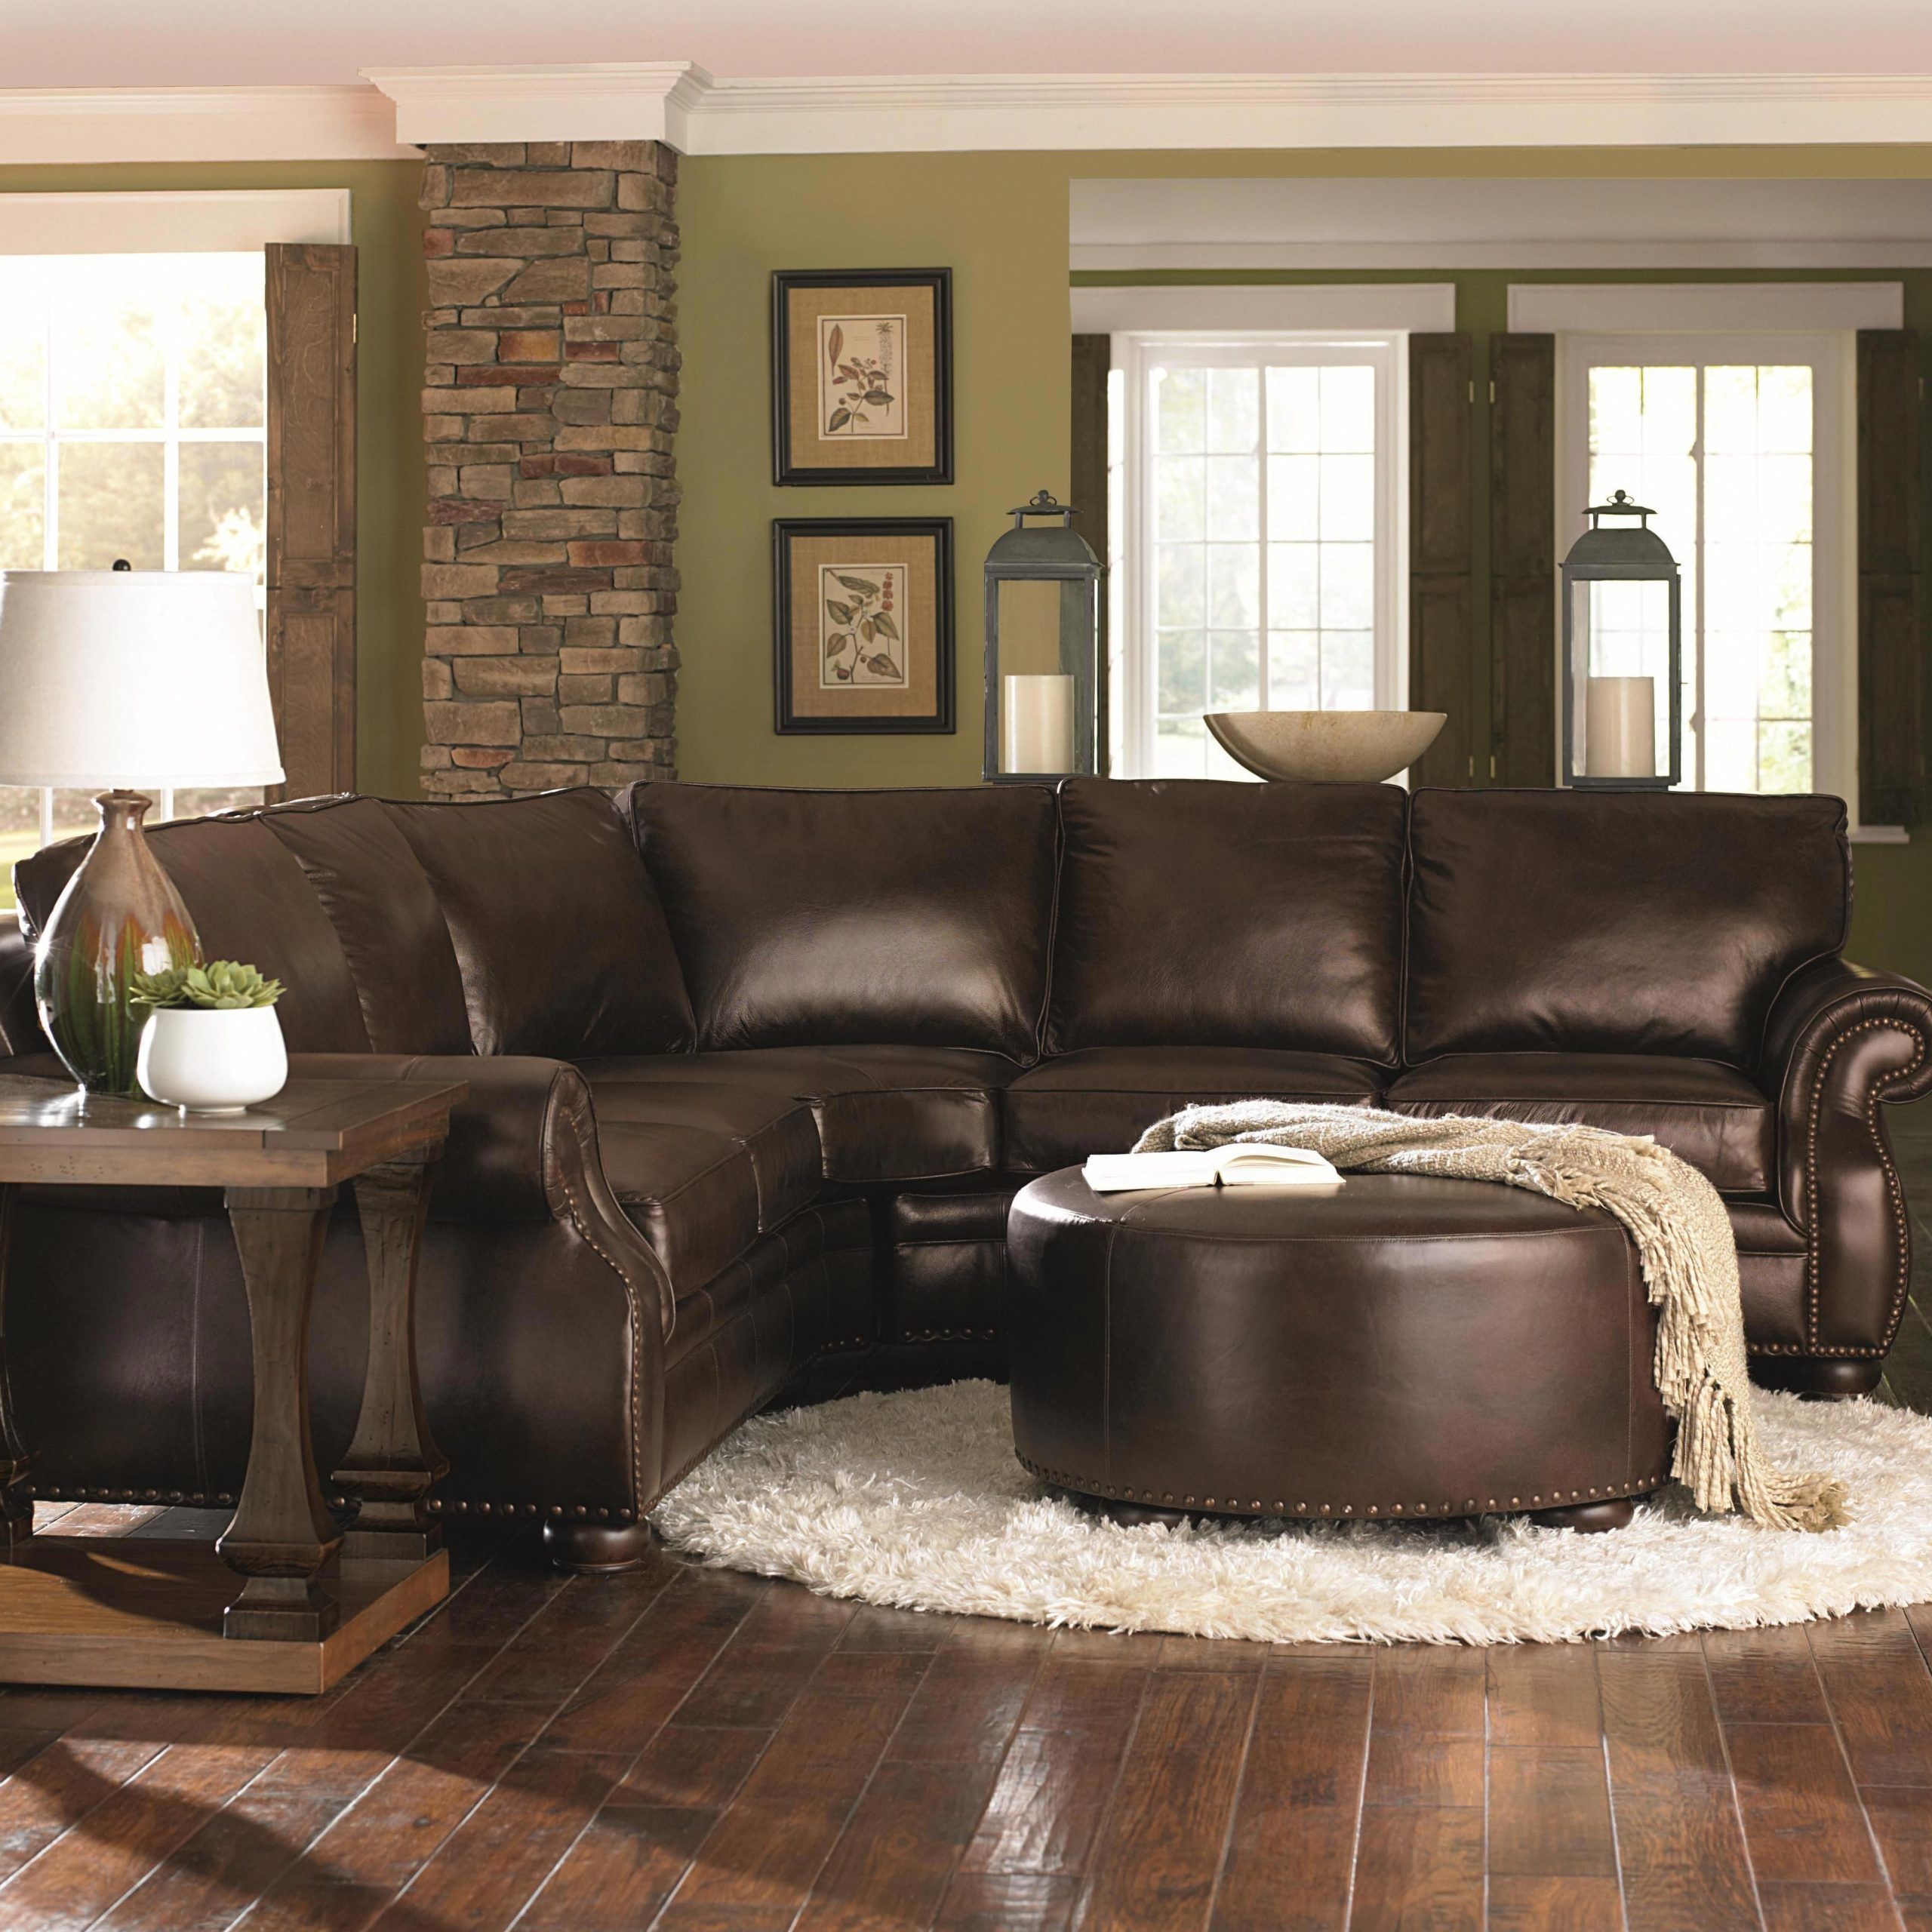 Chocolate Brown Leather Sectional W/ Round Ottoman   Love Love Love Within Sofas With Ottomans In Brown (View 8 of 20)